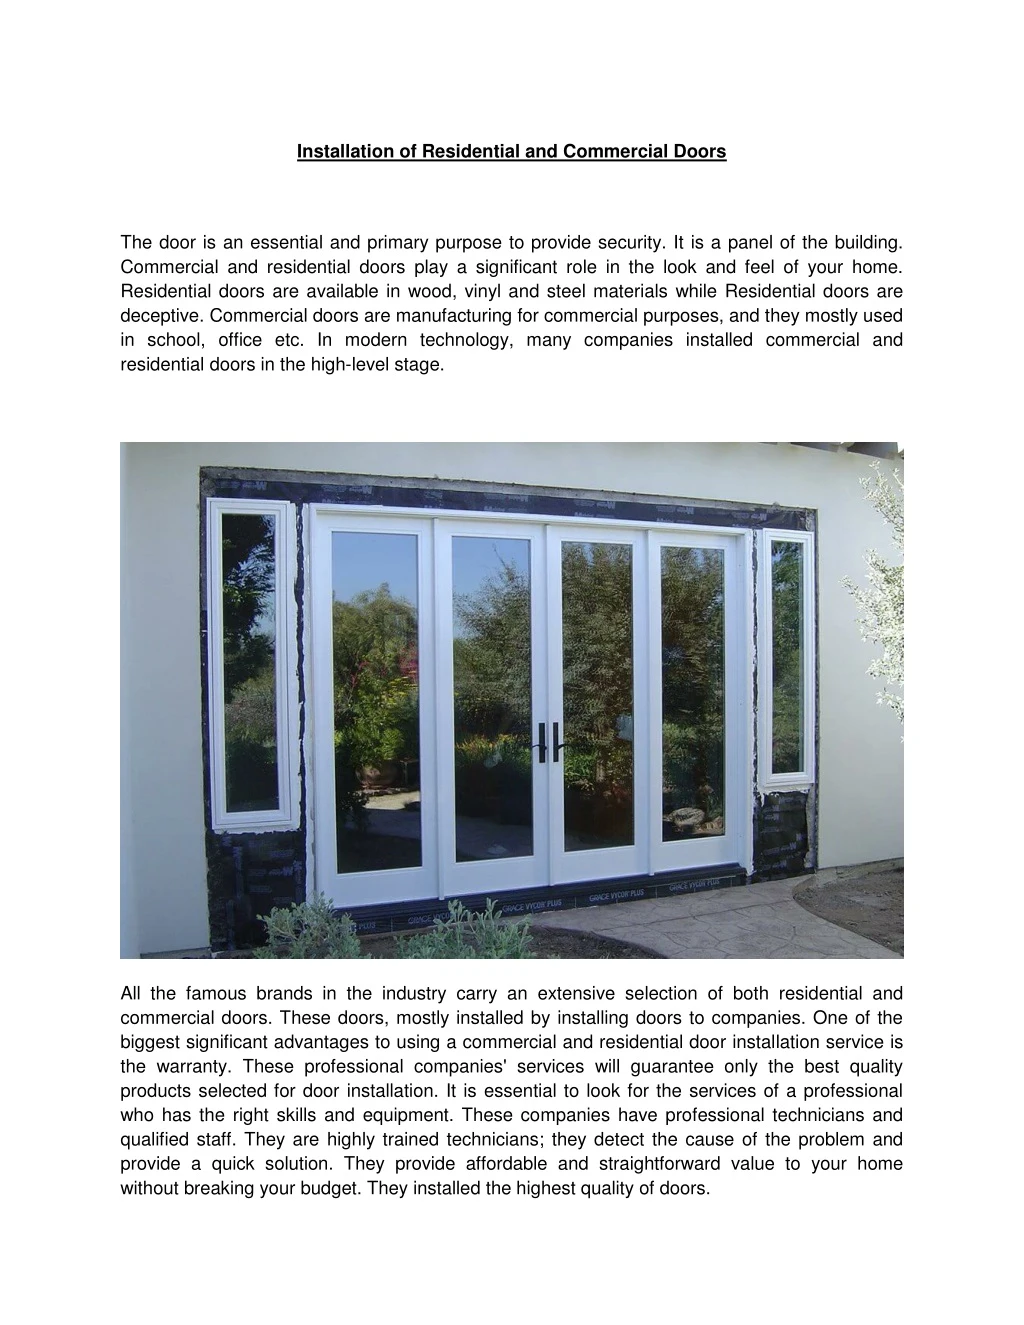 installation of residential and commercial doors